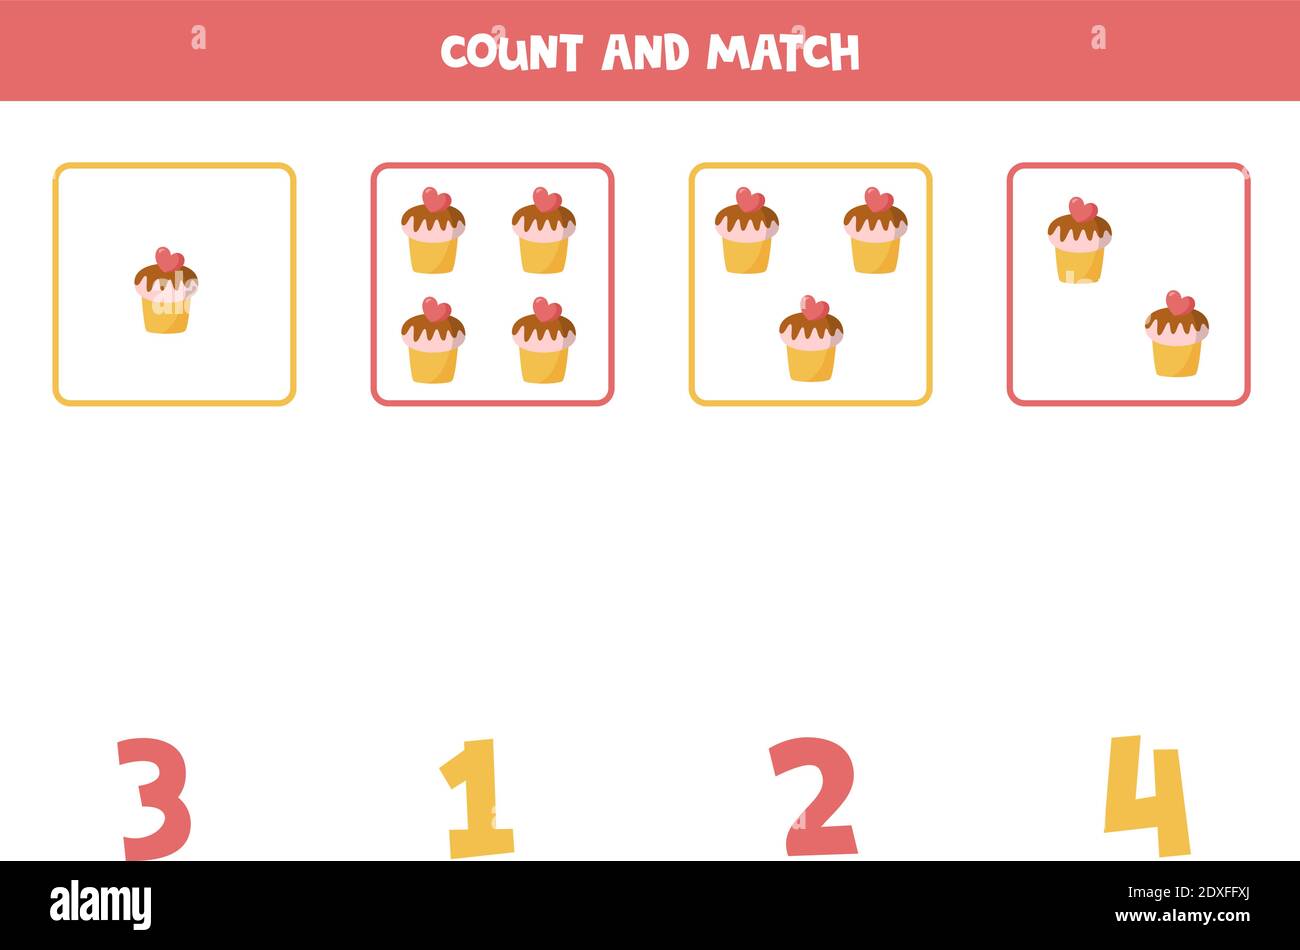 Count all valentine cupcakes and match with correct answer. Educational math game for kids. Stock Vector